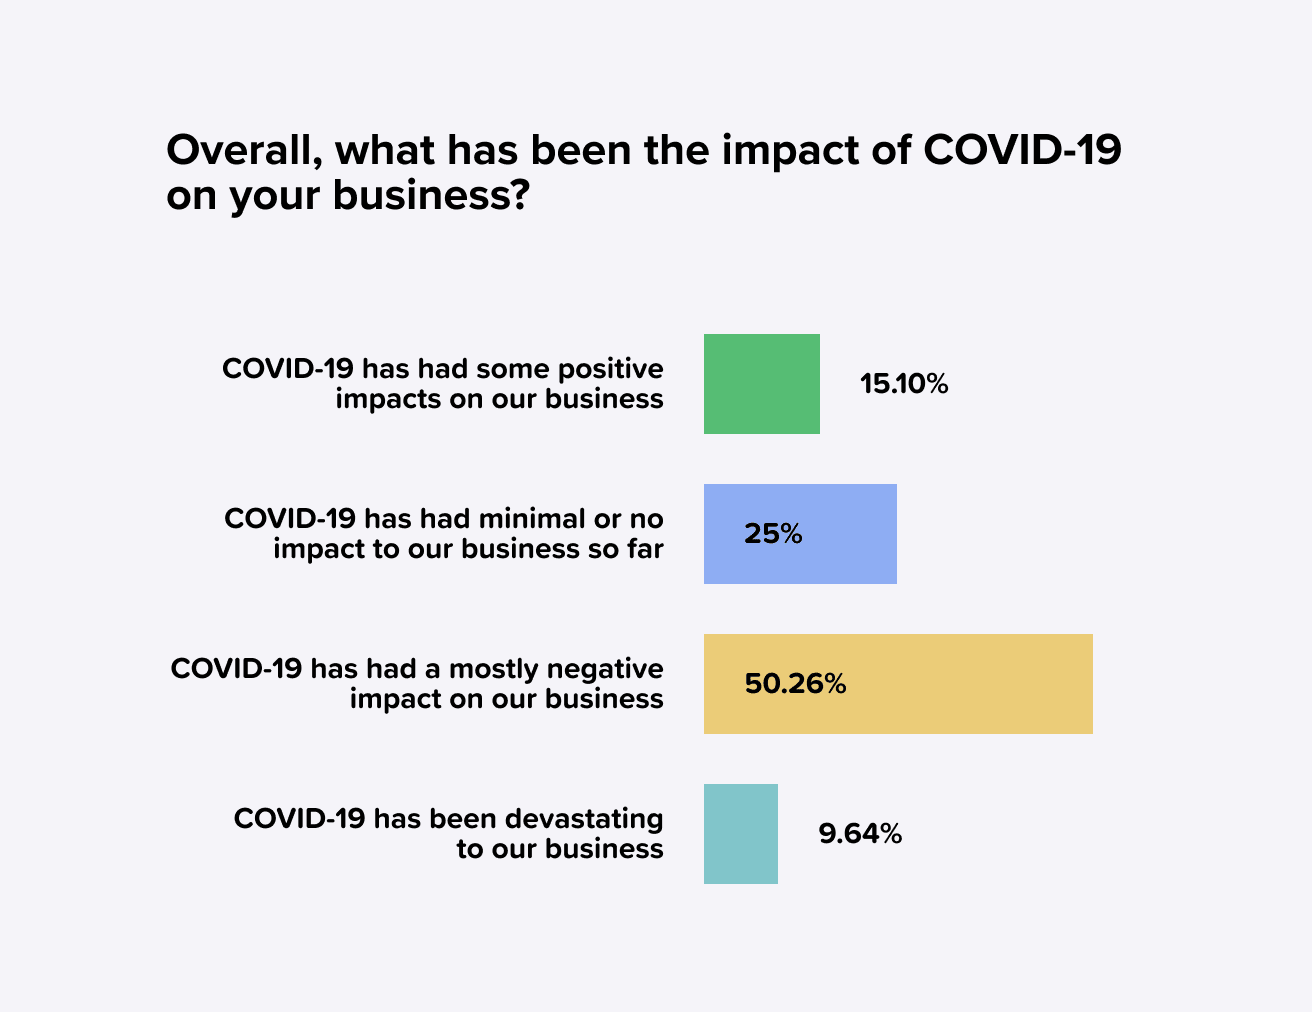 60% of respondents reported experiencing anywhere from negative effects to “devastation” as a result of the COVID-19 pandemic.